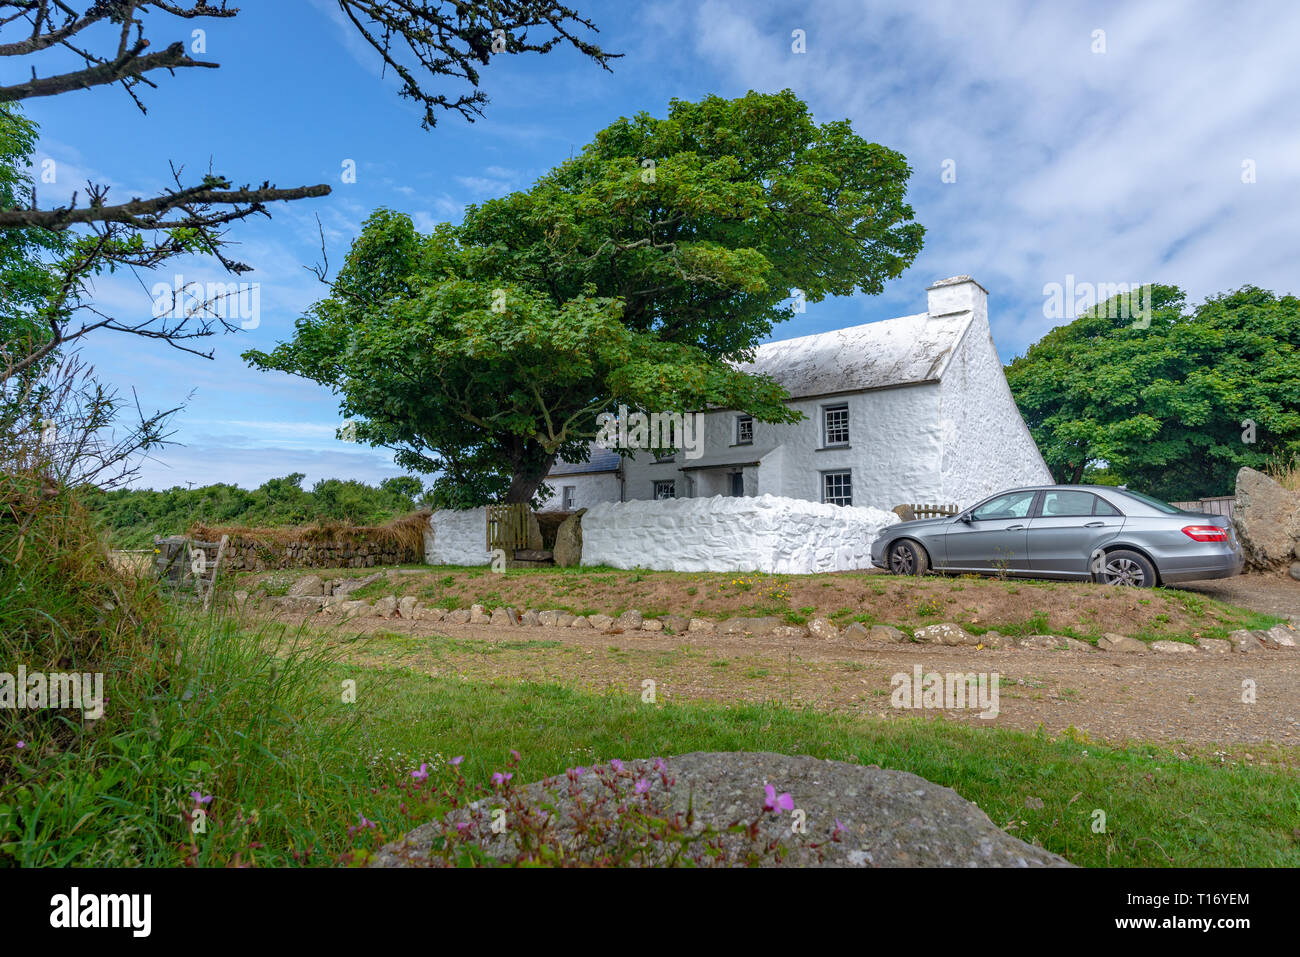 Typical white traditional country house protected by an old oak in Pembrokeshire Coast National Park, Wales, United Kingdom Stock Photo